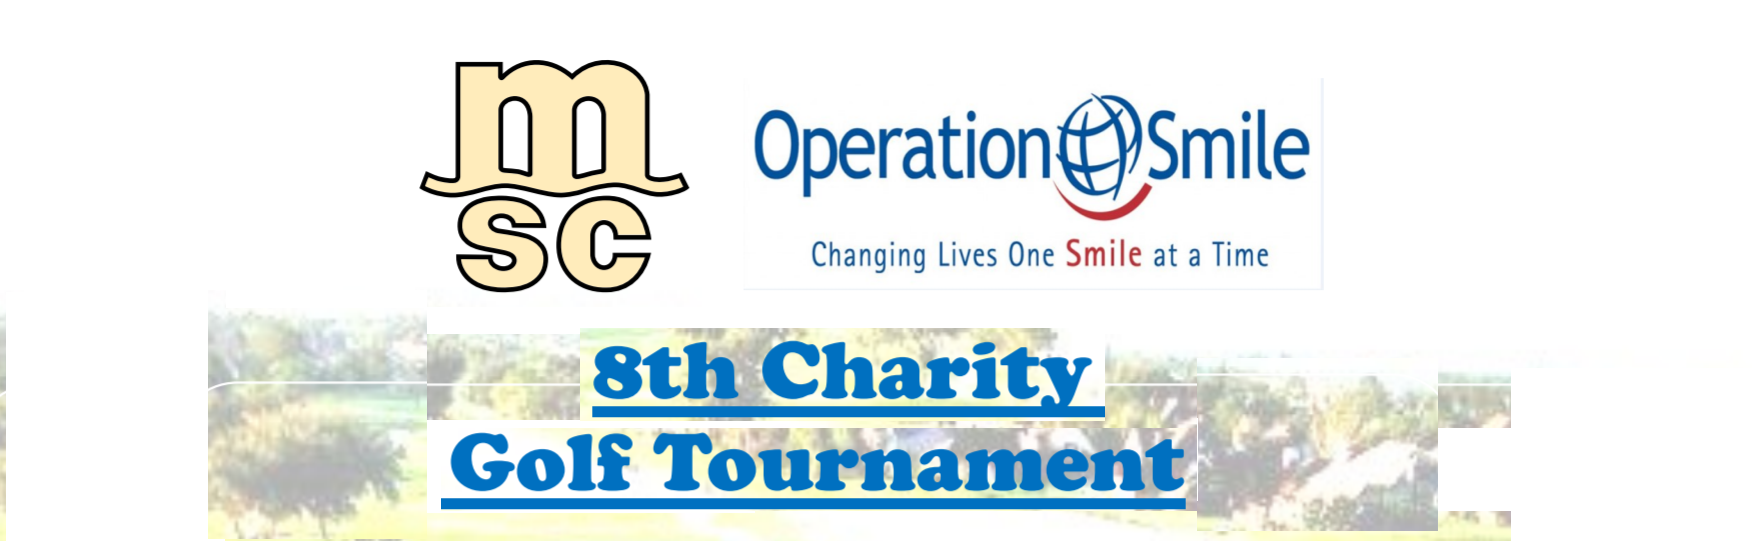 MSC Boston 8th Annual Charity Golf Tournament for Operation Smile